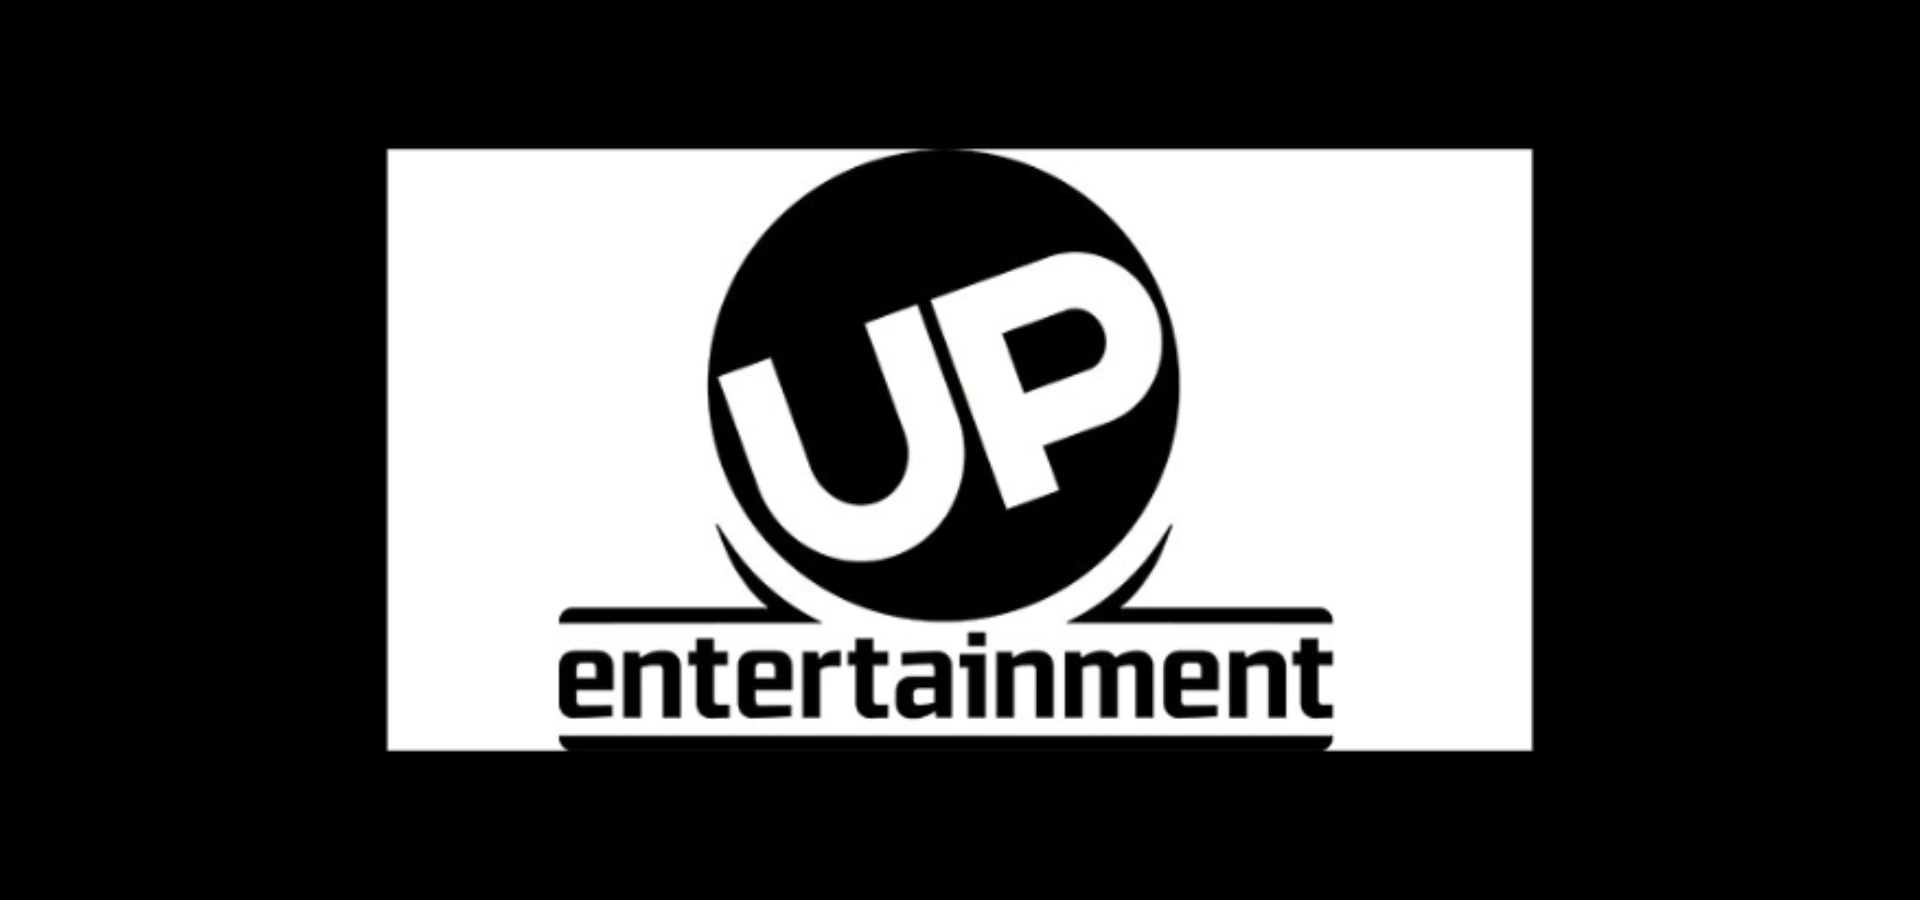 UP Entertainment To Introduce Family Entertainment Streaming Bundle